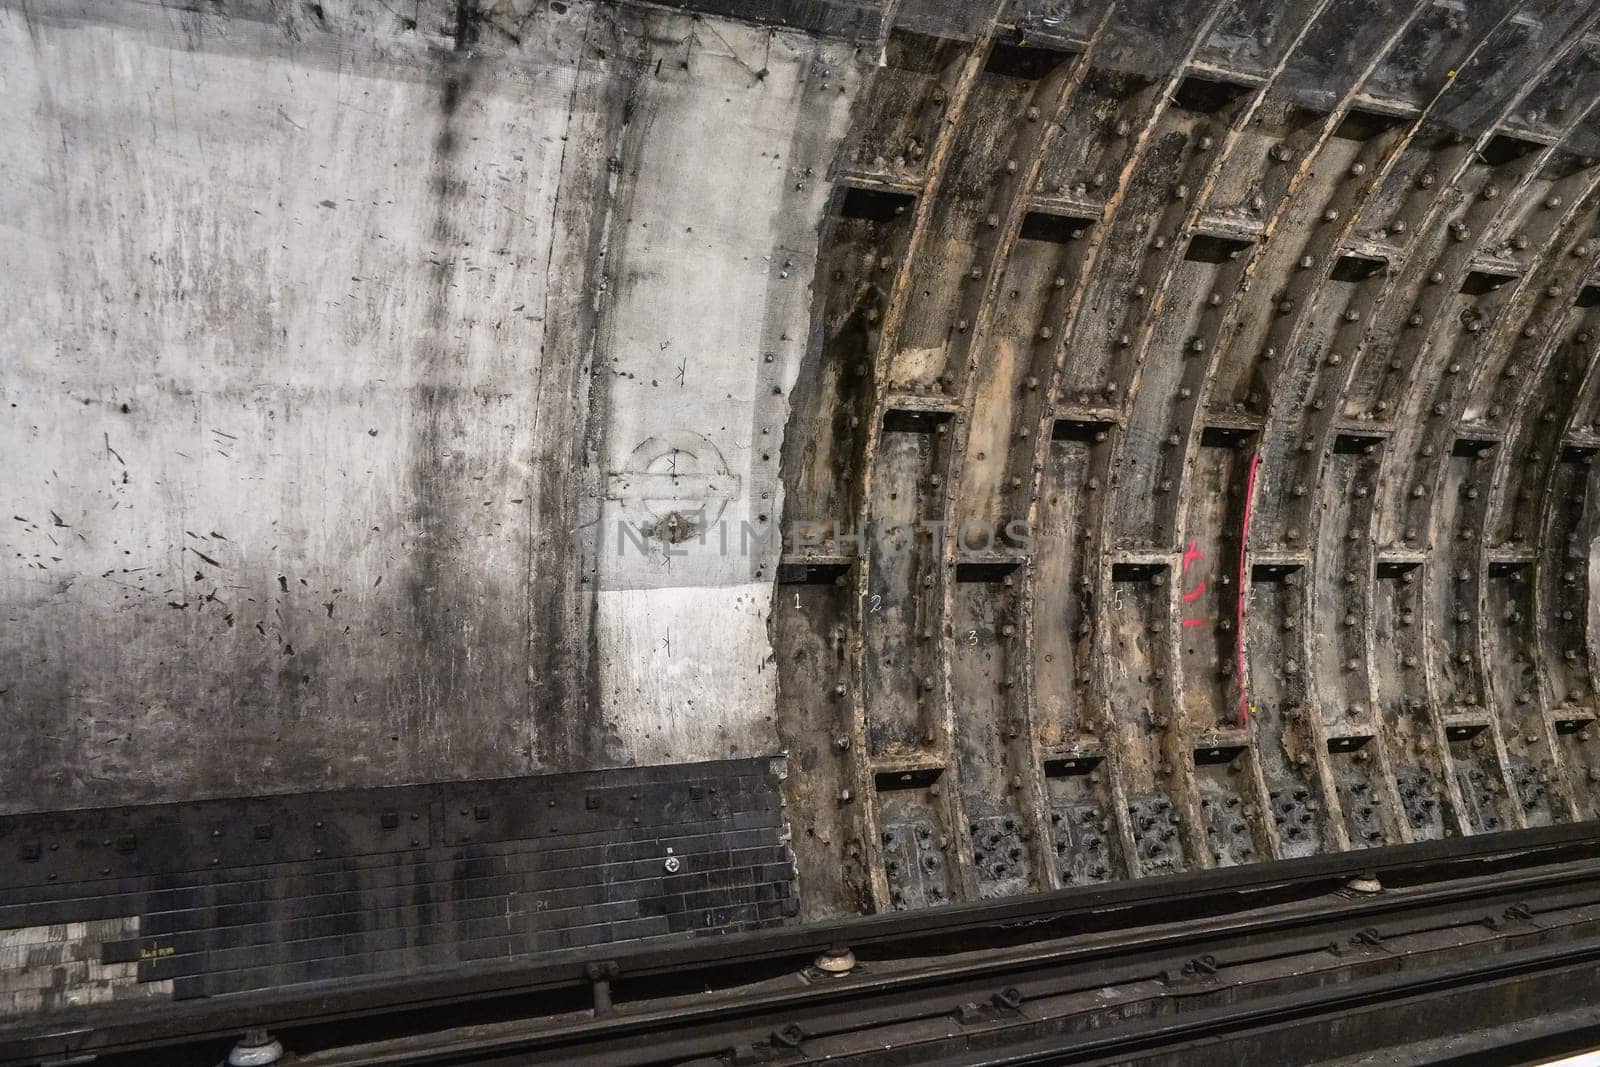 London, United Kingdom - February 02, 2019: Old dirty wall in tube train tunnel, missing London Underground logo on concrete